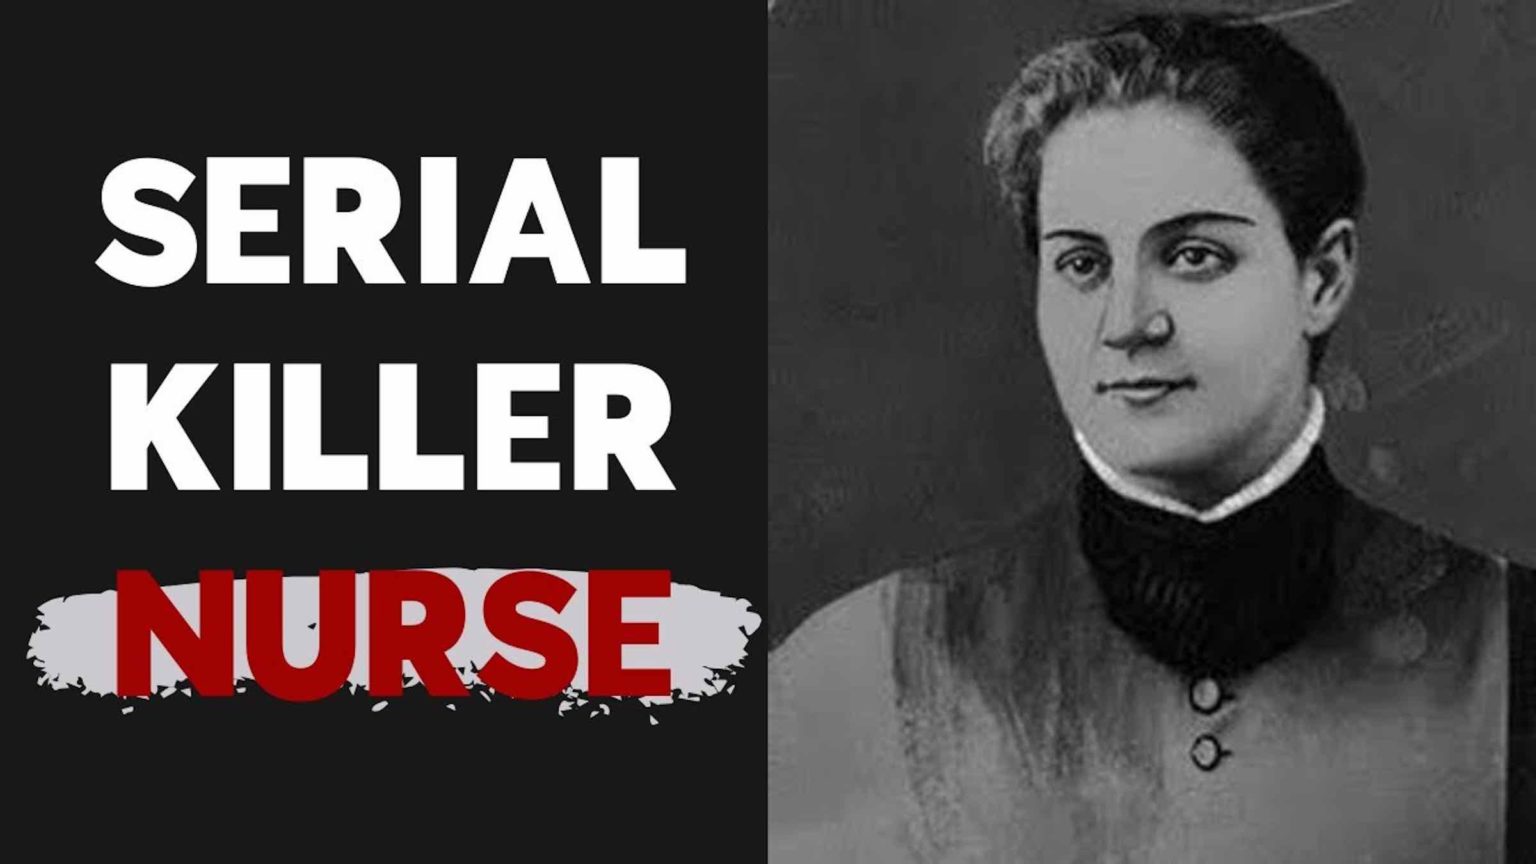 “Jolly” Jane Toppan was an American serial killer who used her nursing profession as cover for her poisoning sprees. Here's what we know.